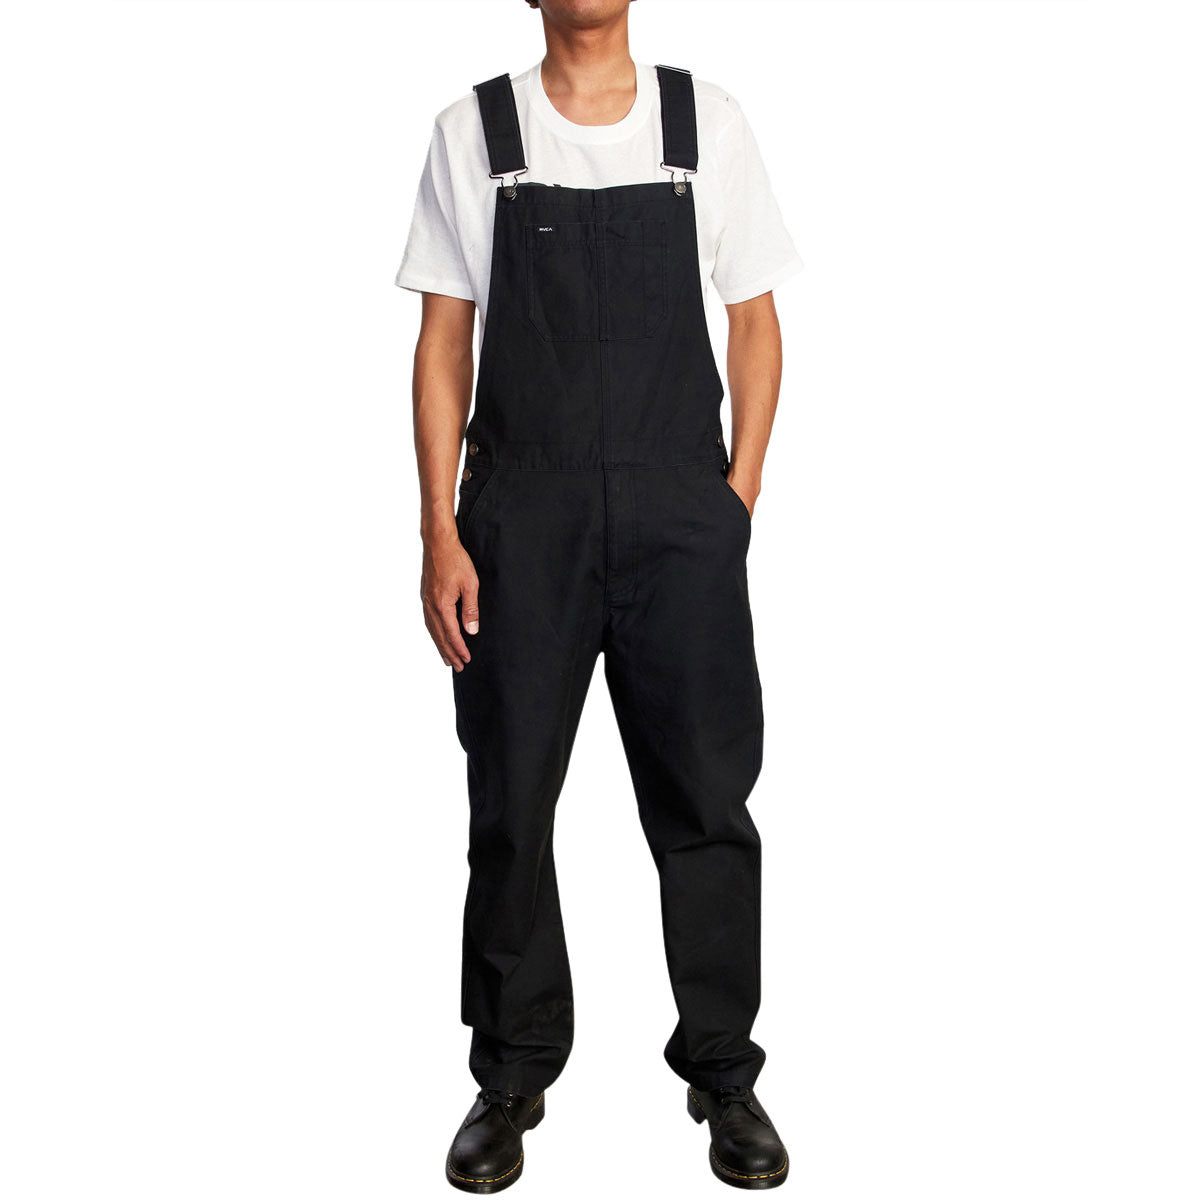 RVCA Chainmail Overall Pants - Rvca Black image 2